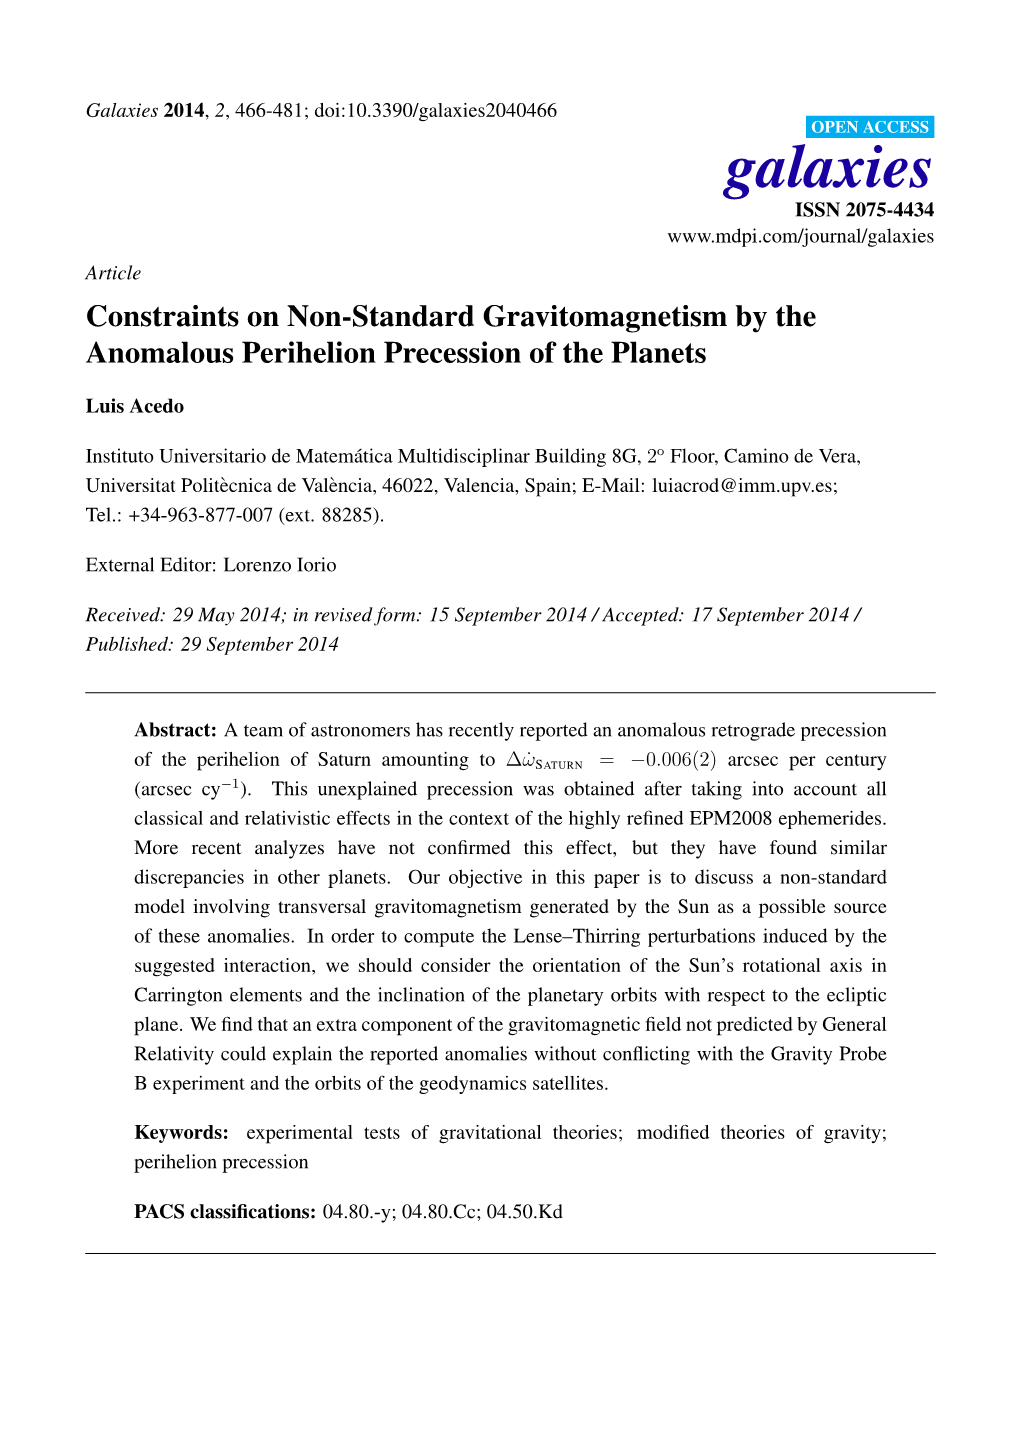 Constraints on Non-Standard Gravitomagnetism by the Anomalous Perihelion Precession of the Planets